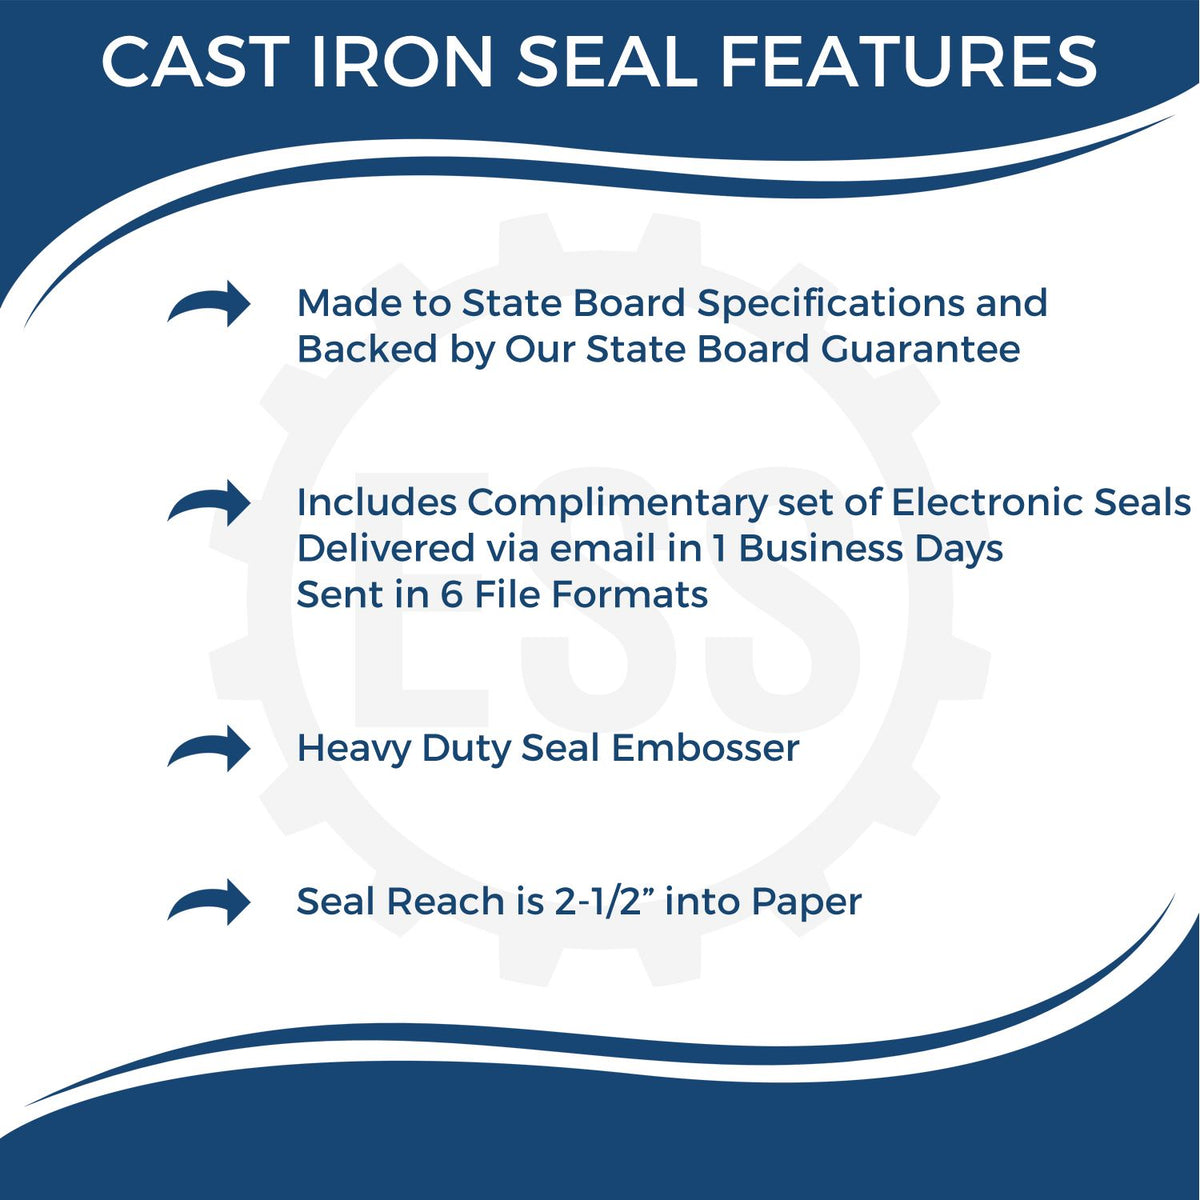 A picture of an infographic highlighting the selling points for the Heavy Duty Cast Iron New York Architect Embosser